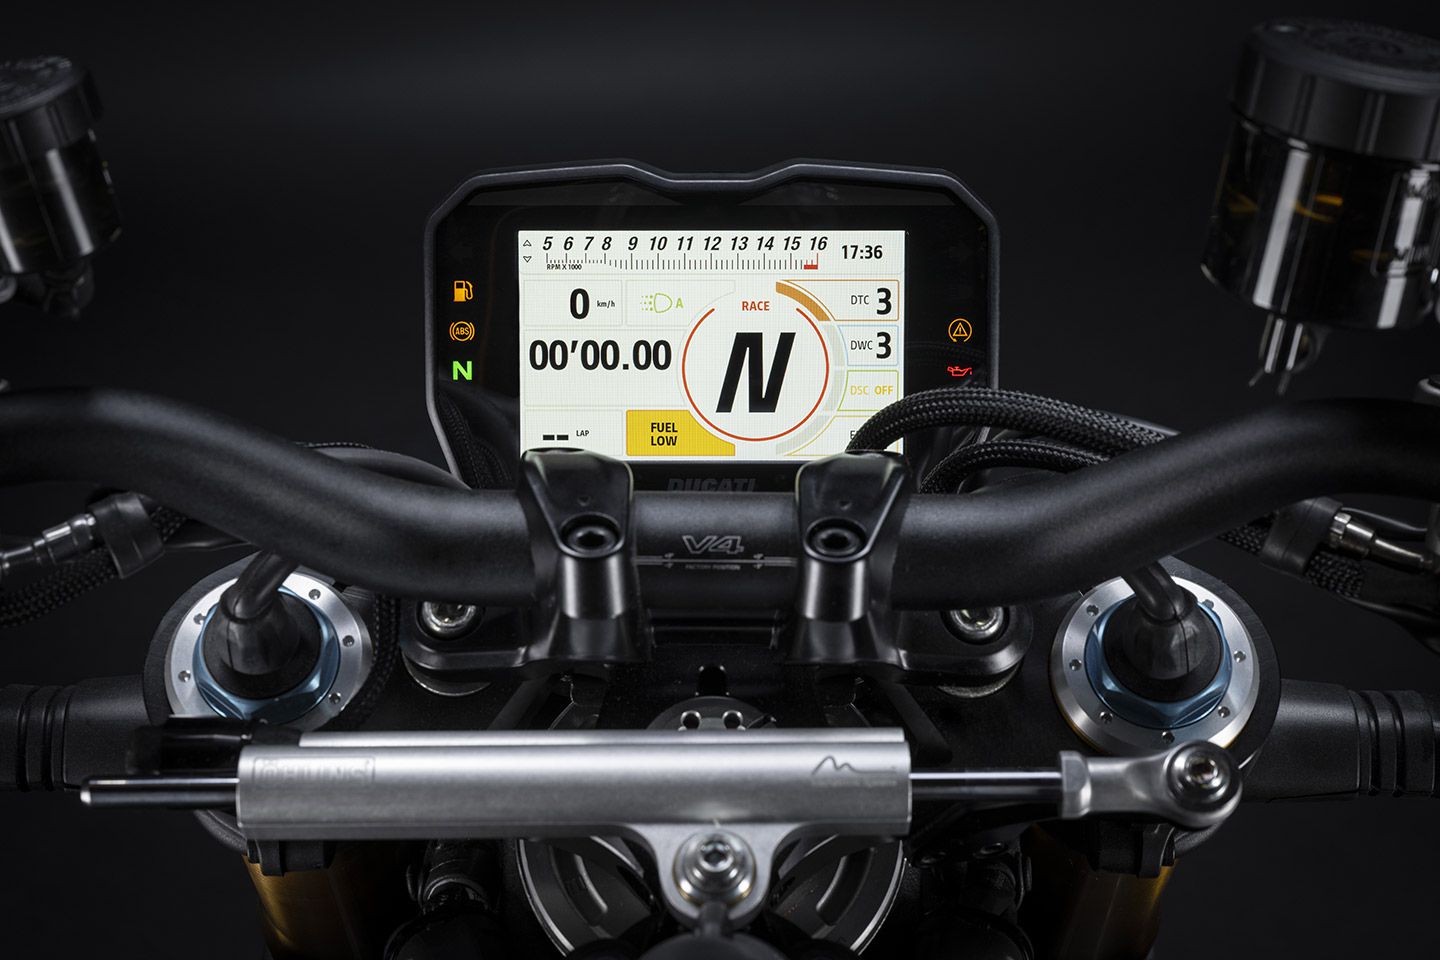 Ducati spent a great deal of time fine tuning the layout of its TFT display for Panigale models, and that format has been carried over to Streetfighter models.